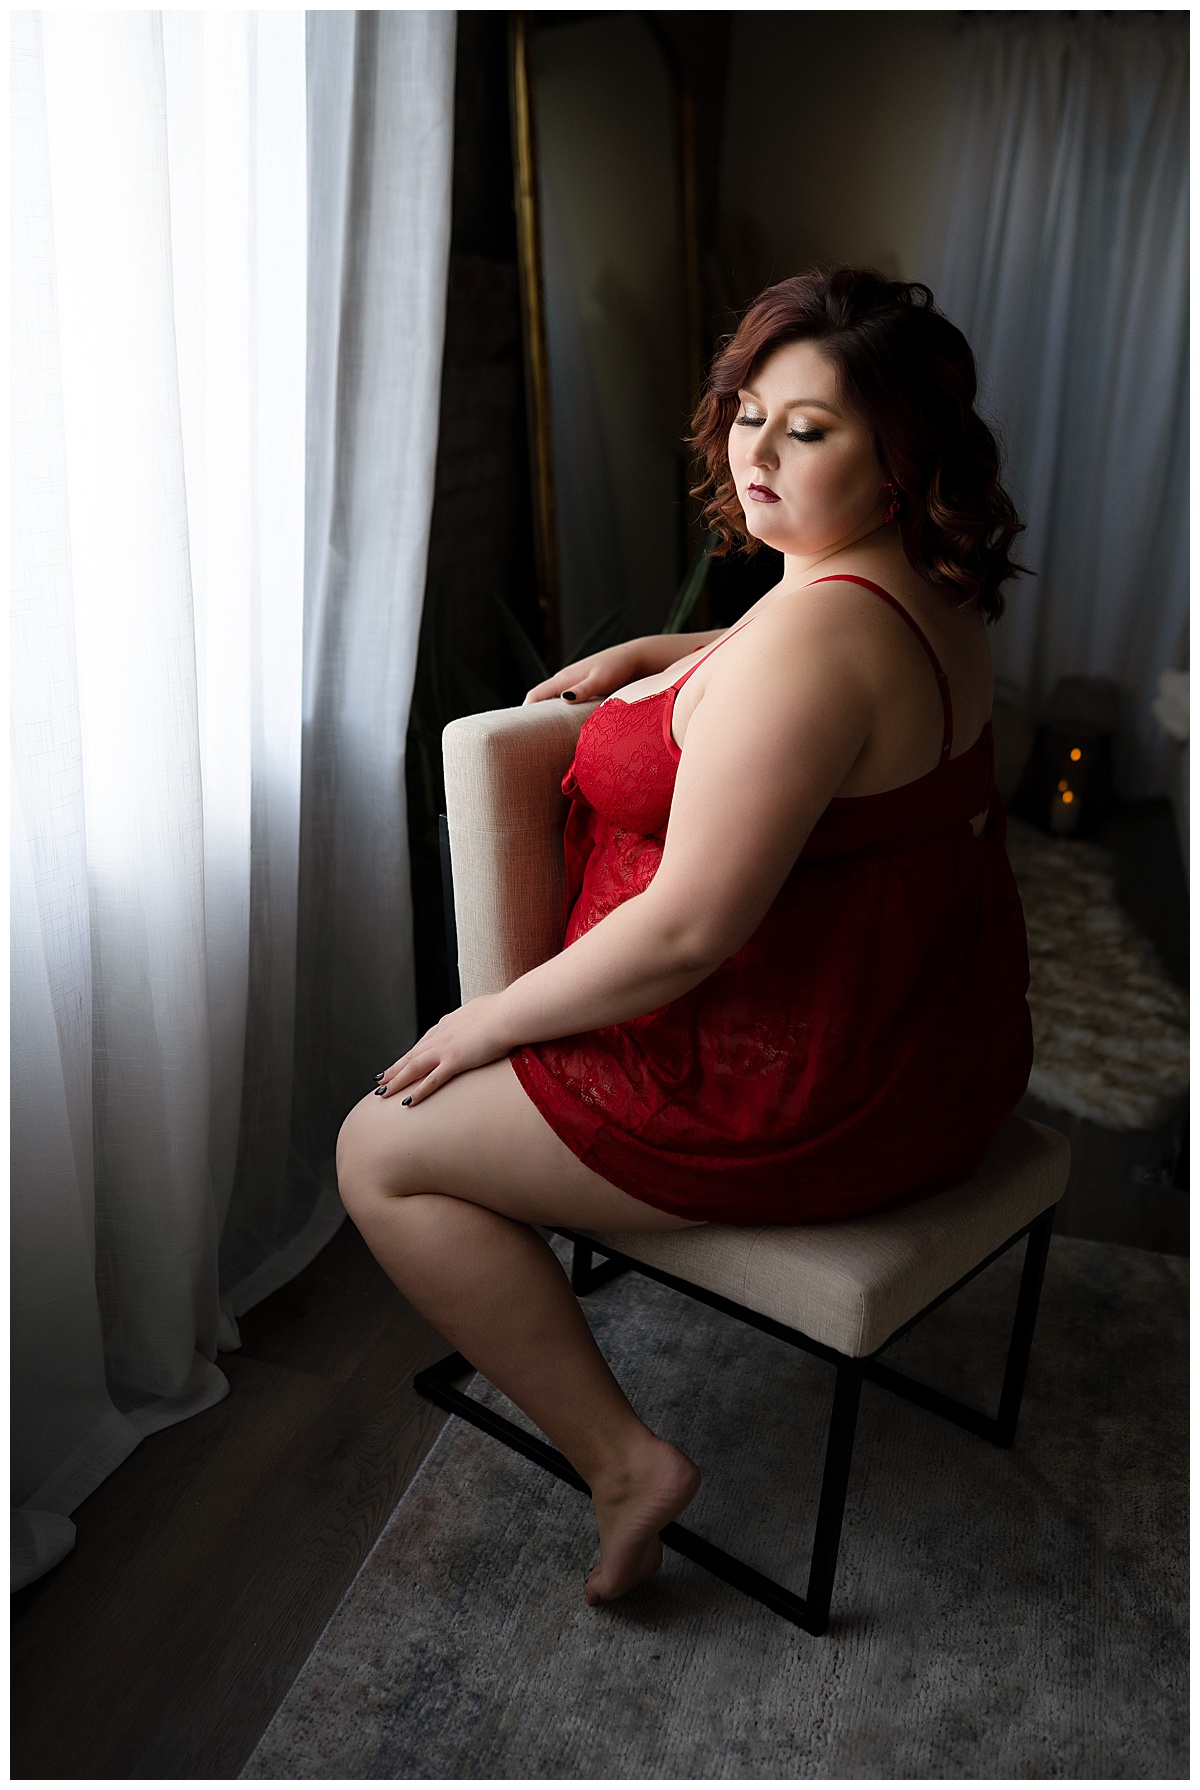 Lady participating in doing something for yourself by sitting on chair in red lingerie 